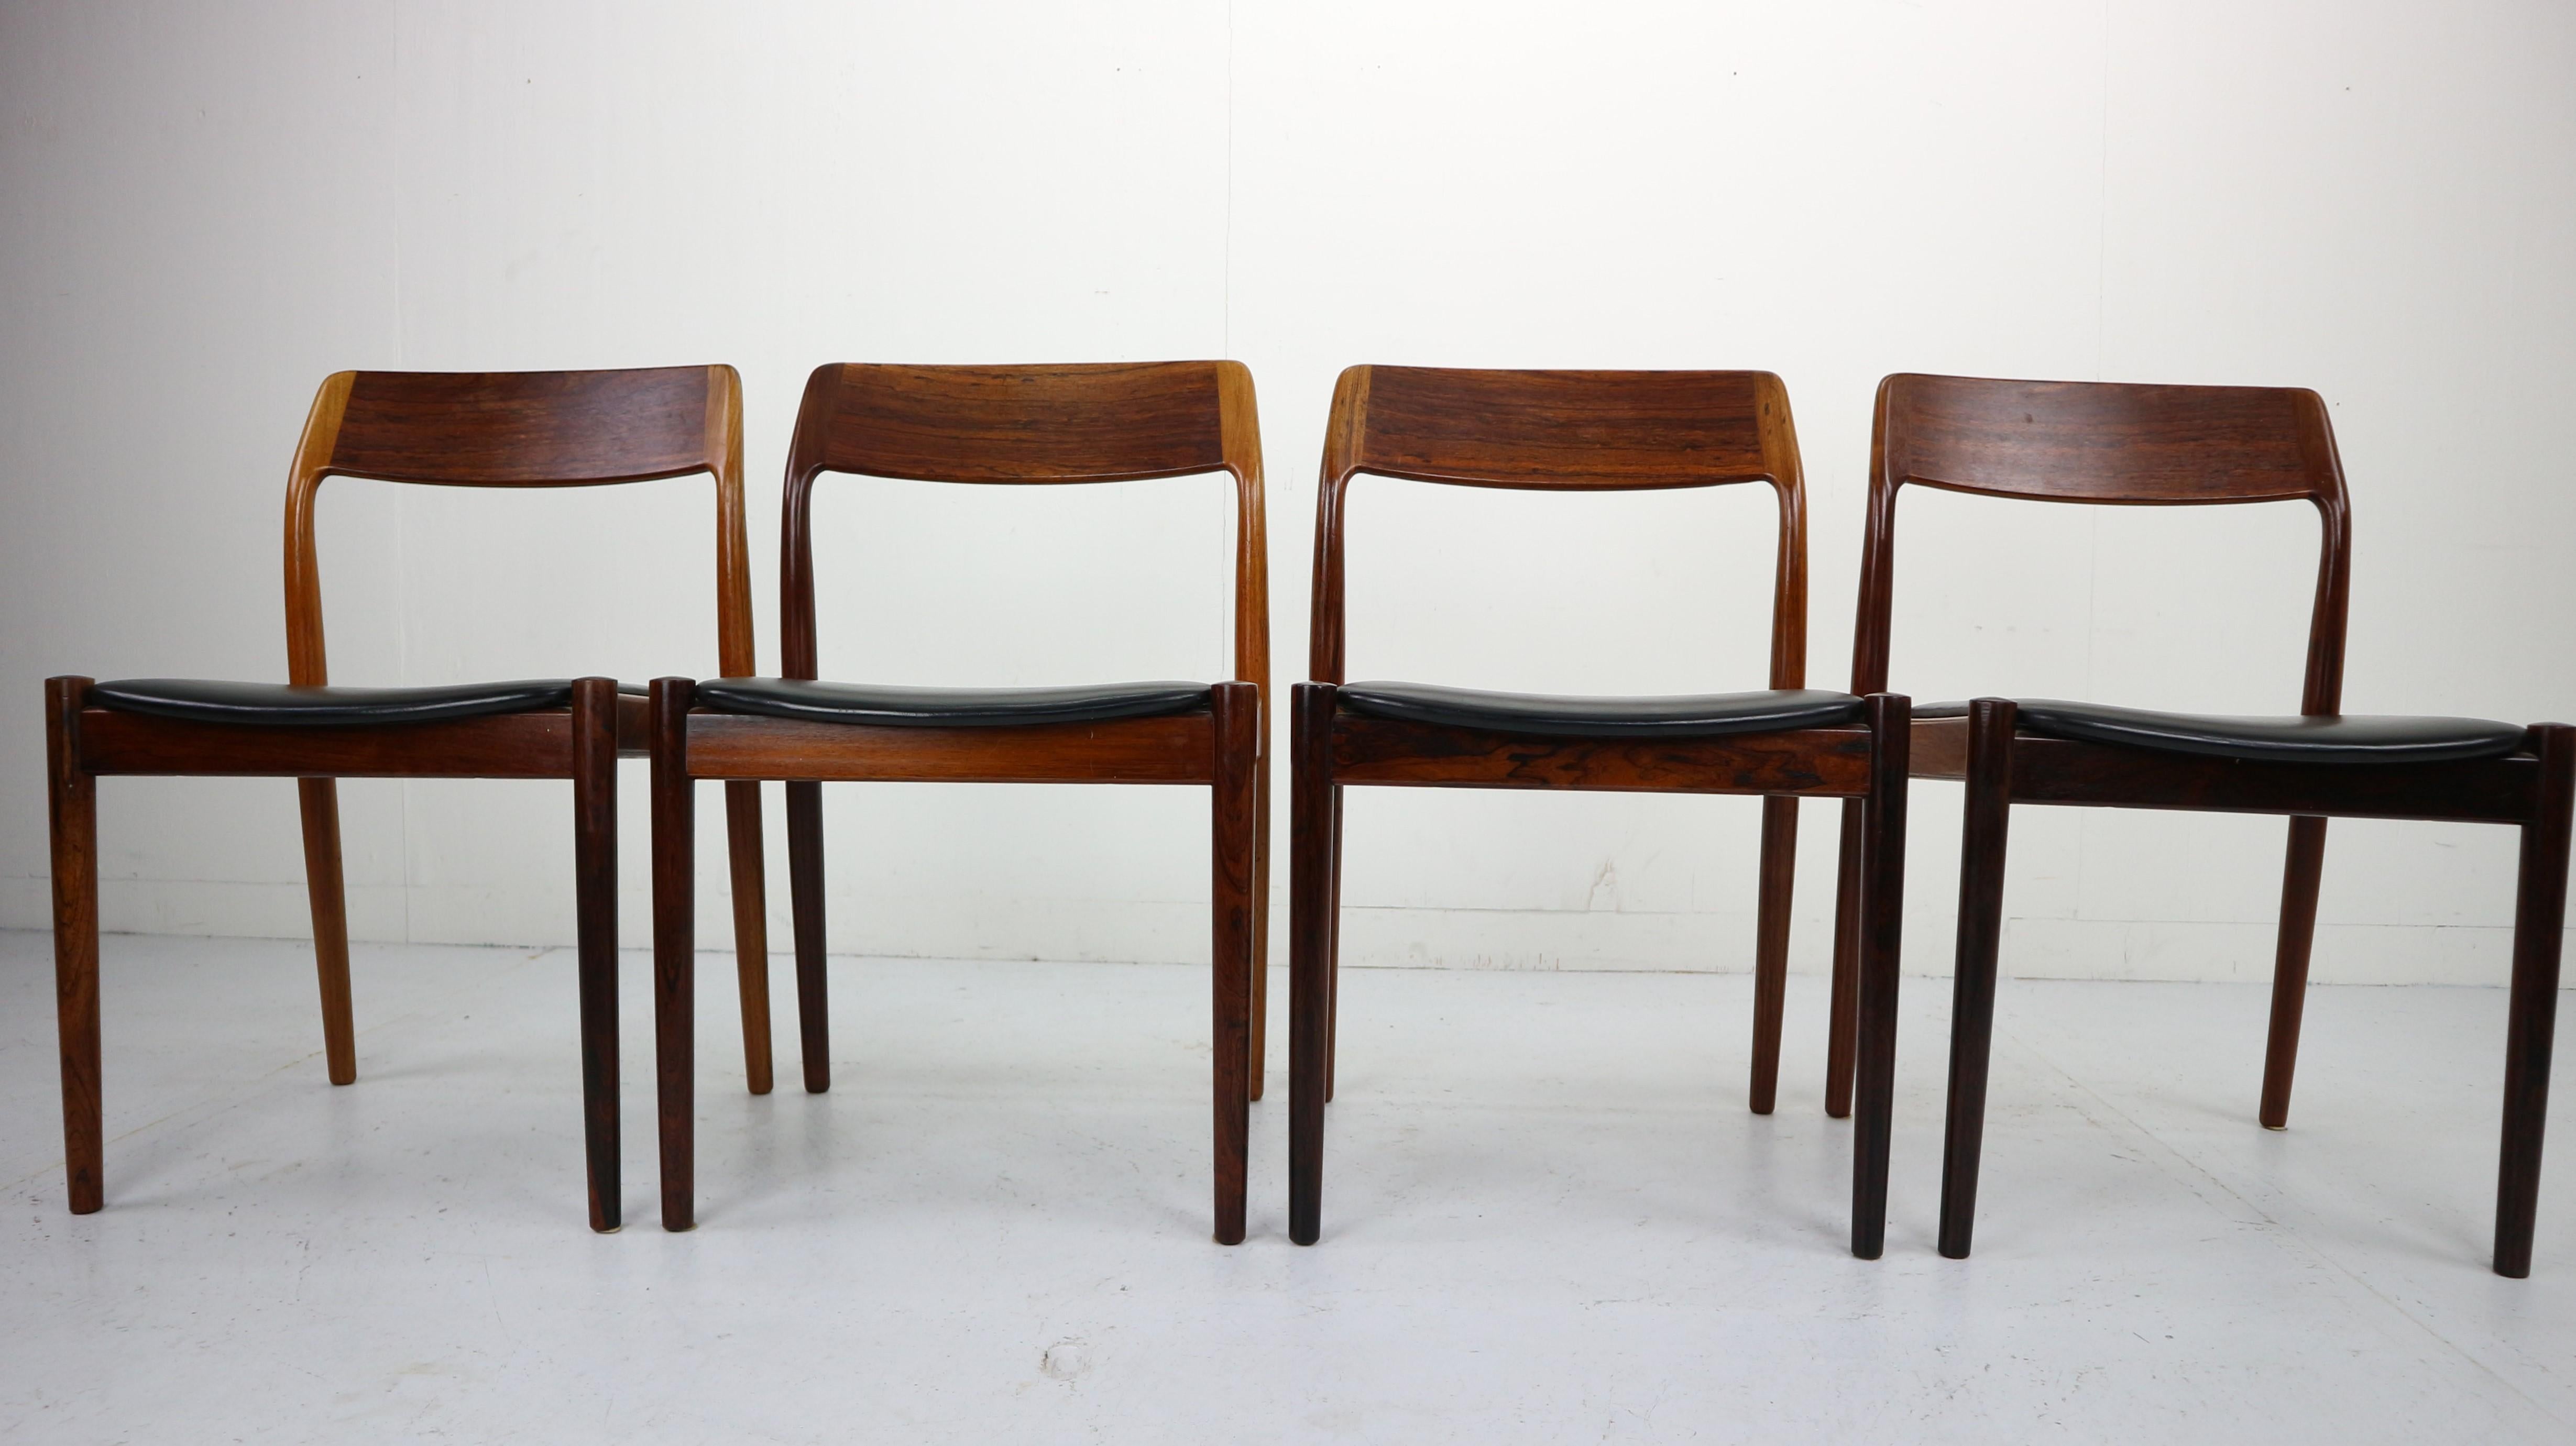 Mid-20th Century Set of 4 Danish Rosewood and Black Vinyl Chairs by Niels Otto Møller, 1960s